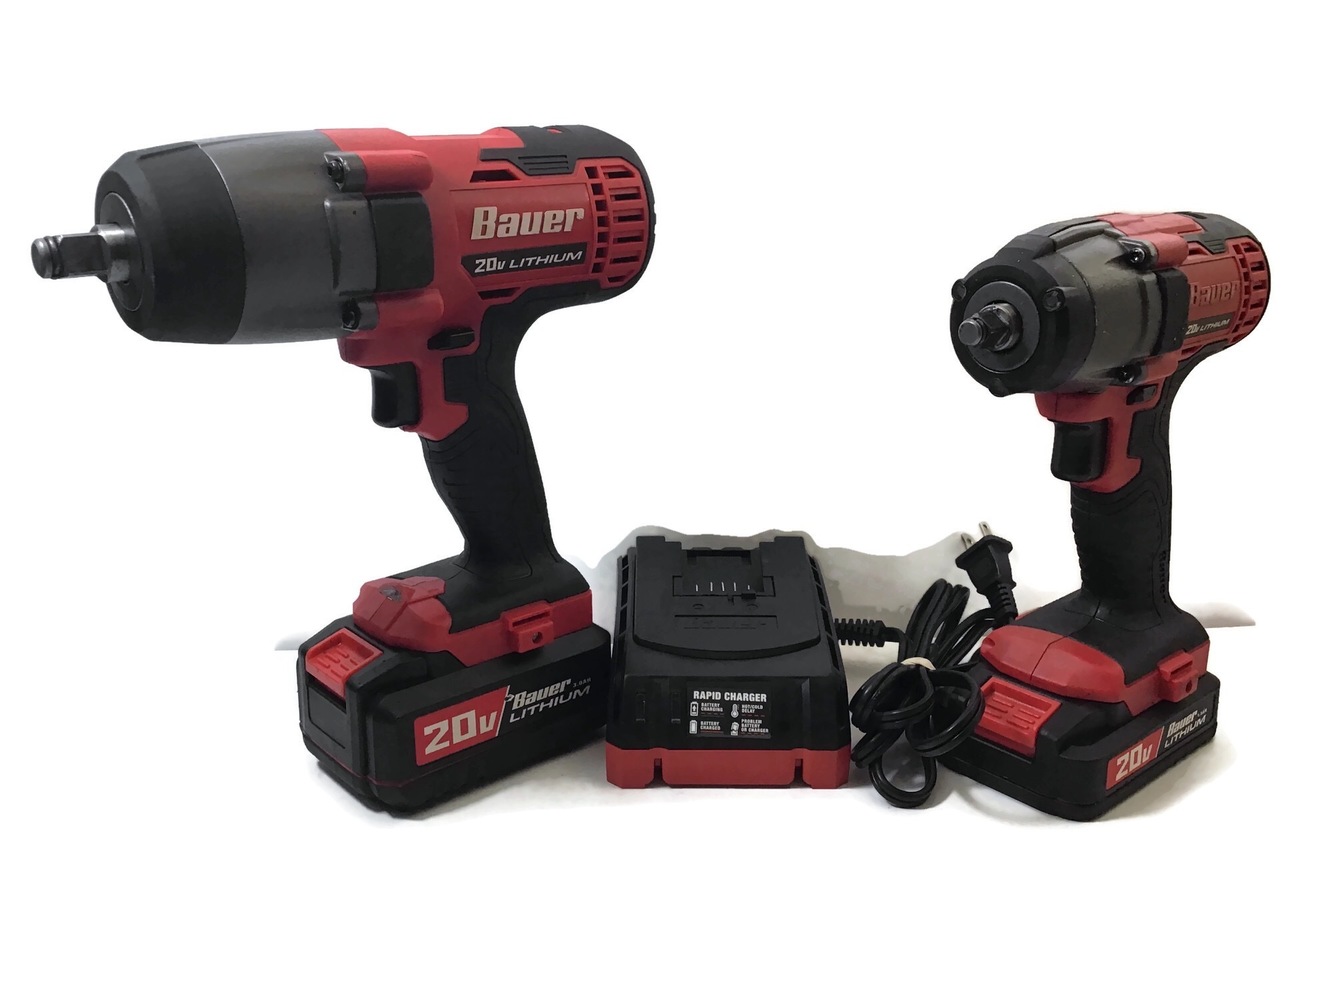 Bauer 1782cb Impact Drill with 3/8" Diver with (2) Batteries and (1